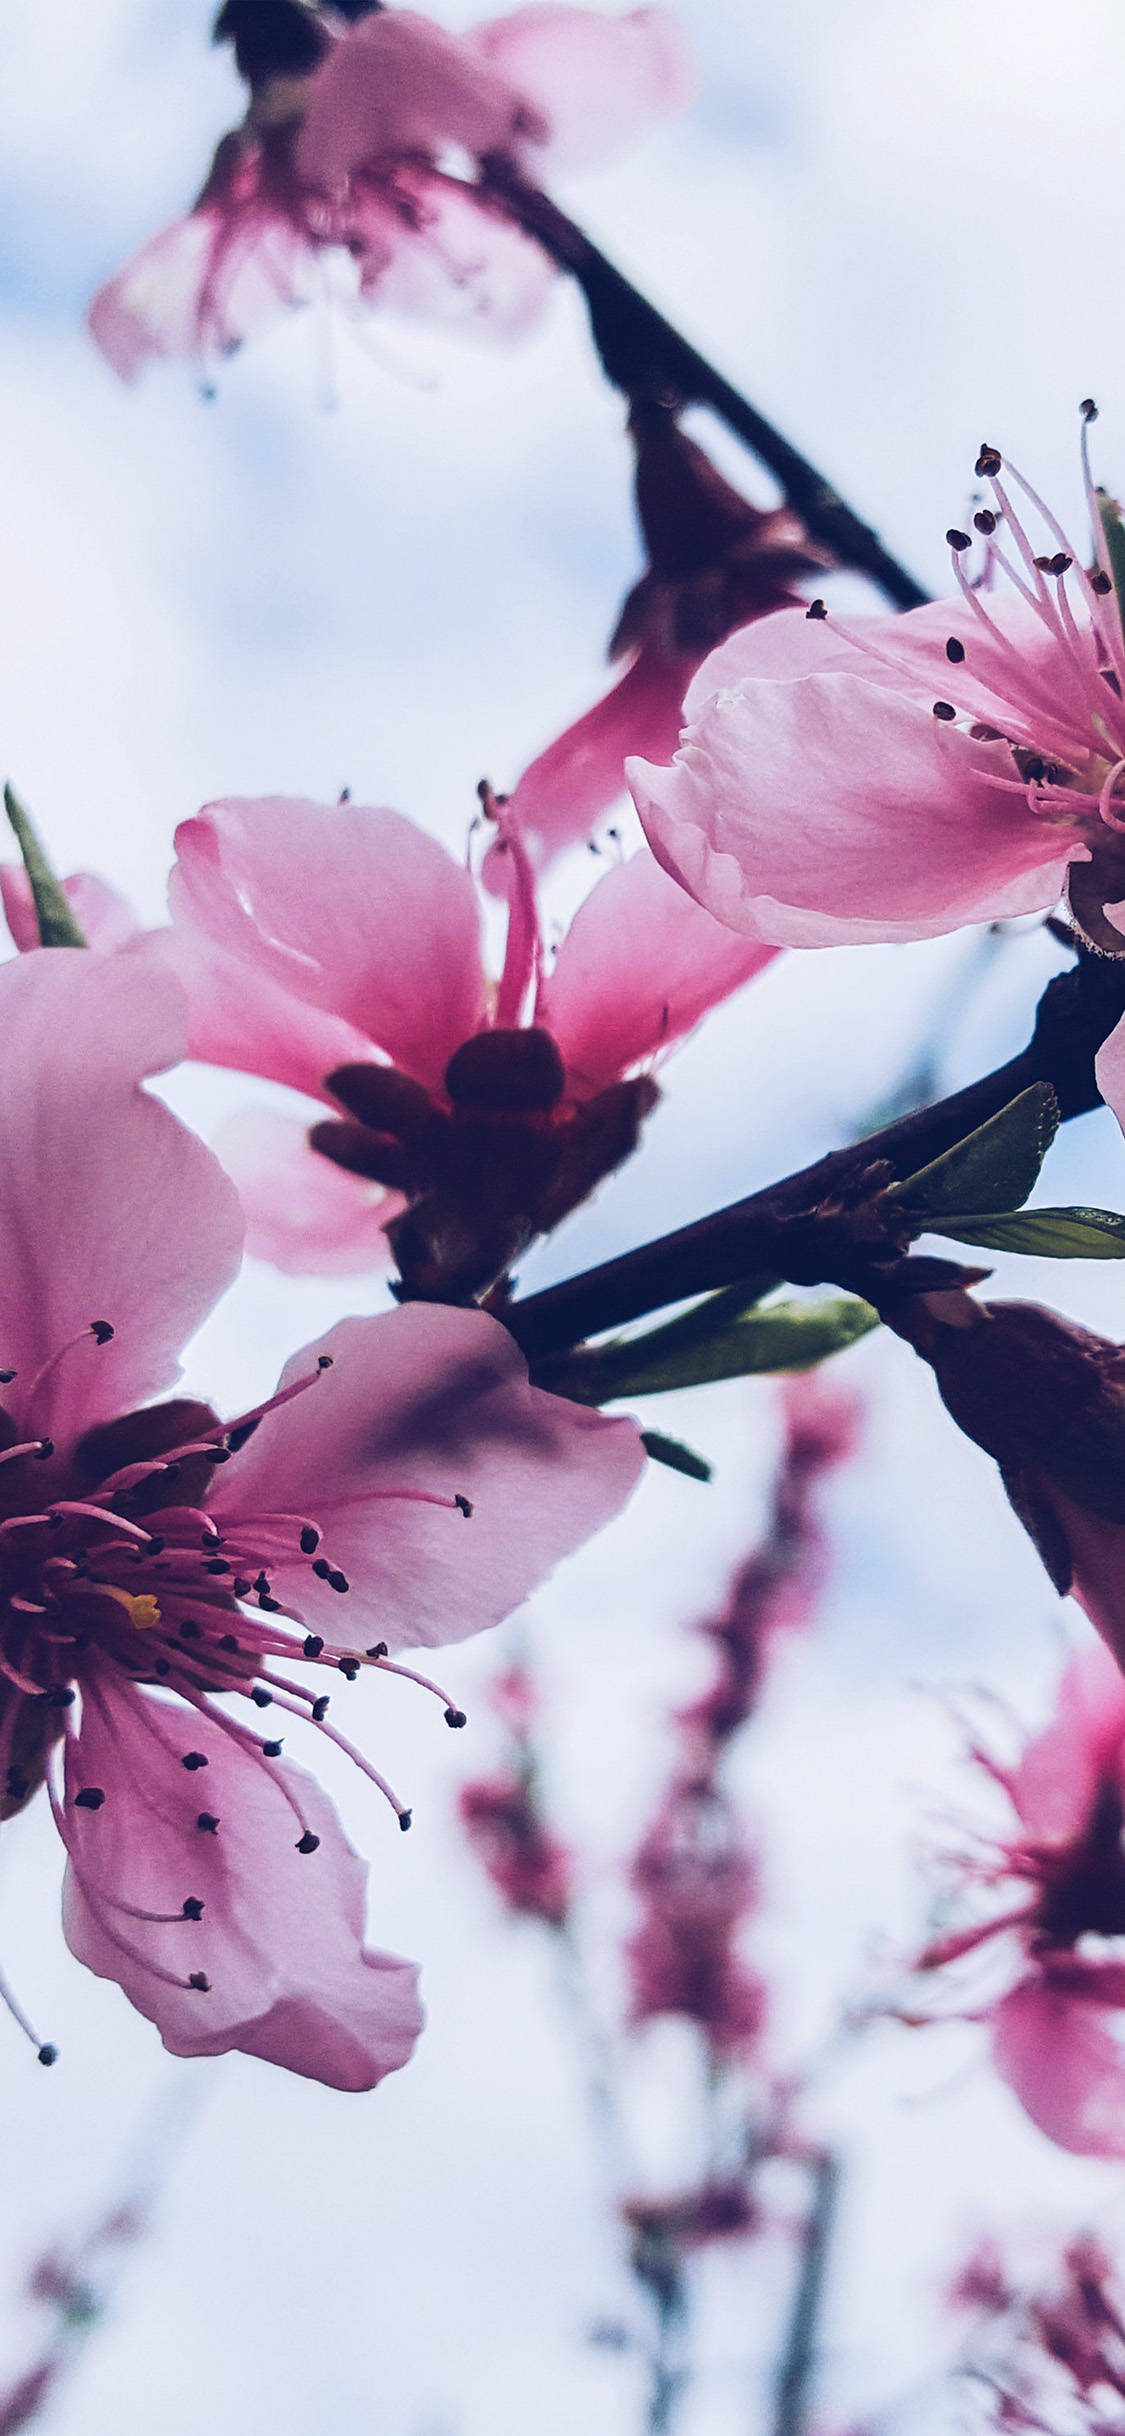 Caption: A Touch of Elegance with Aesthetic Cherry Blossoms for iPhone X Wallpaper